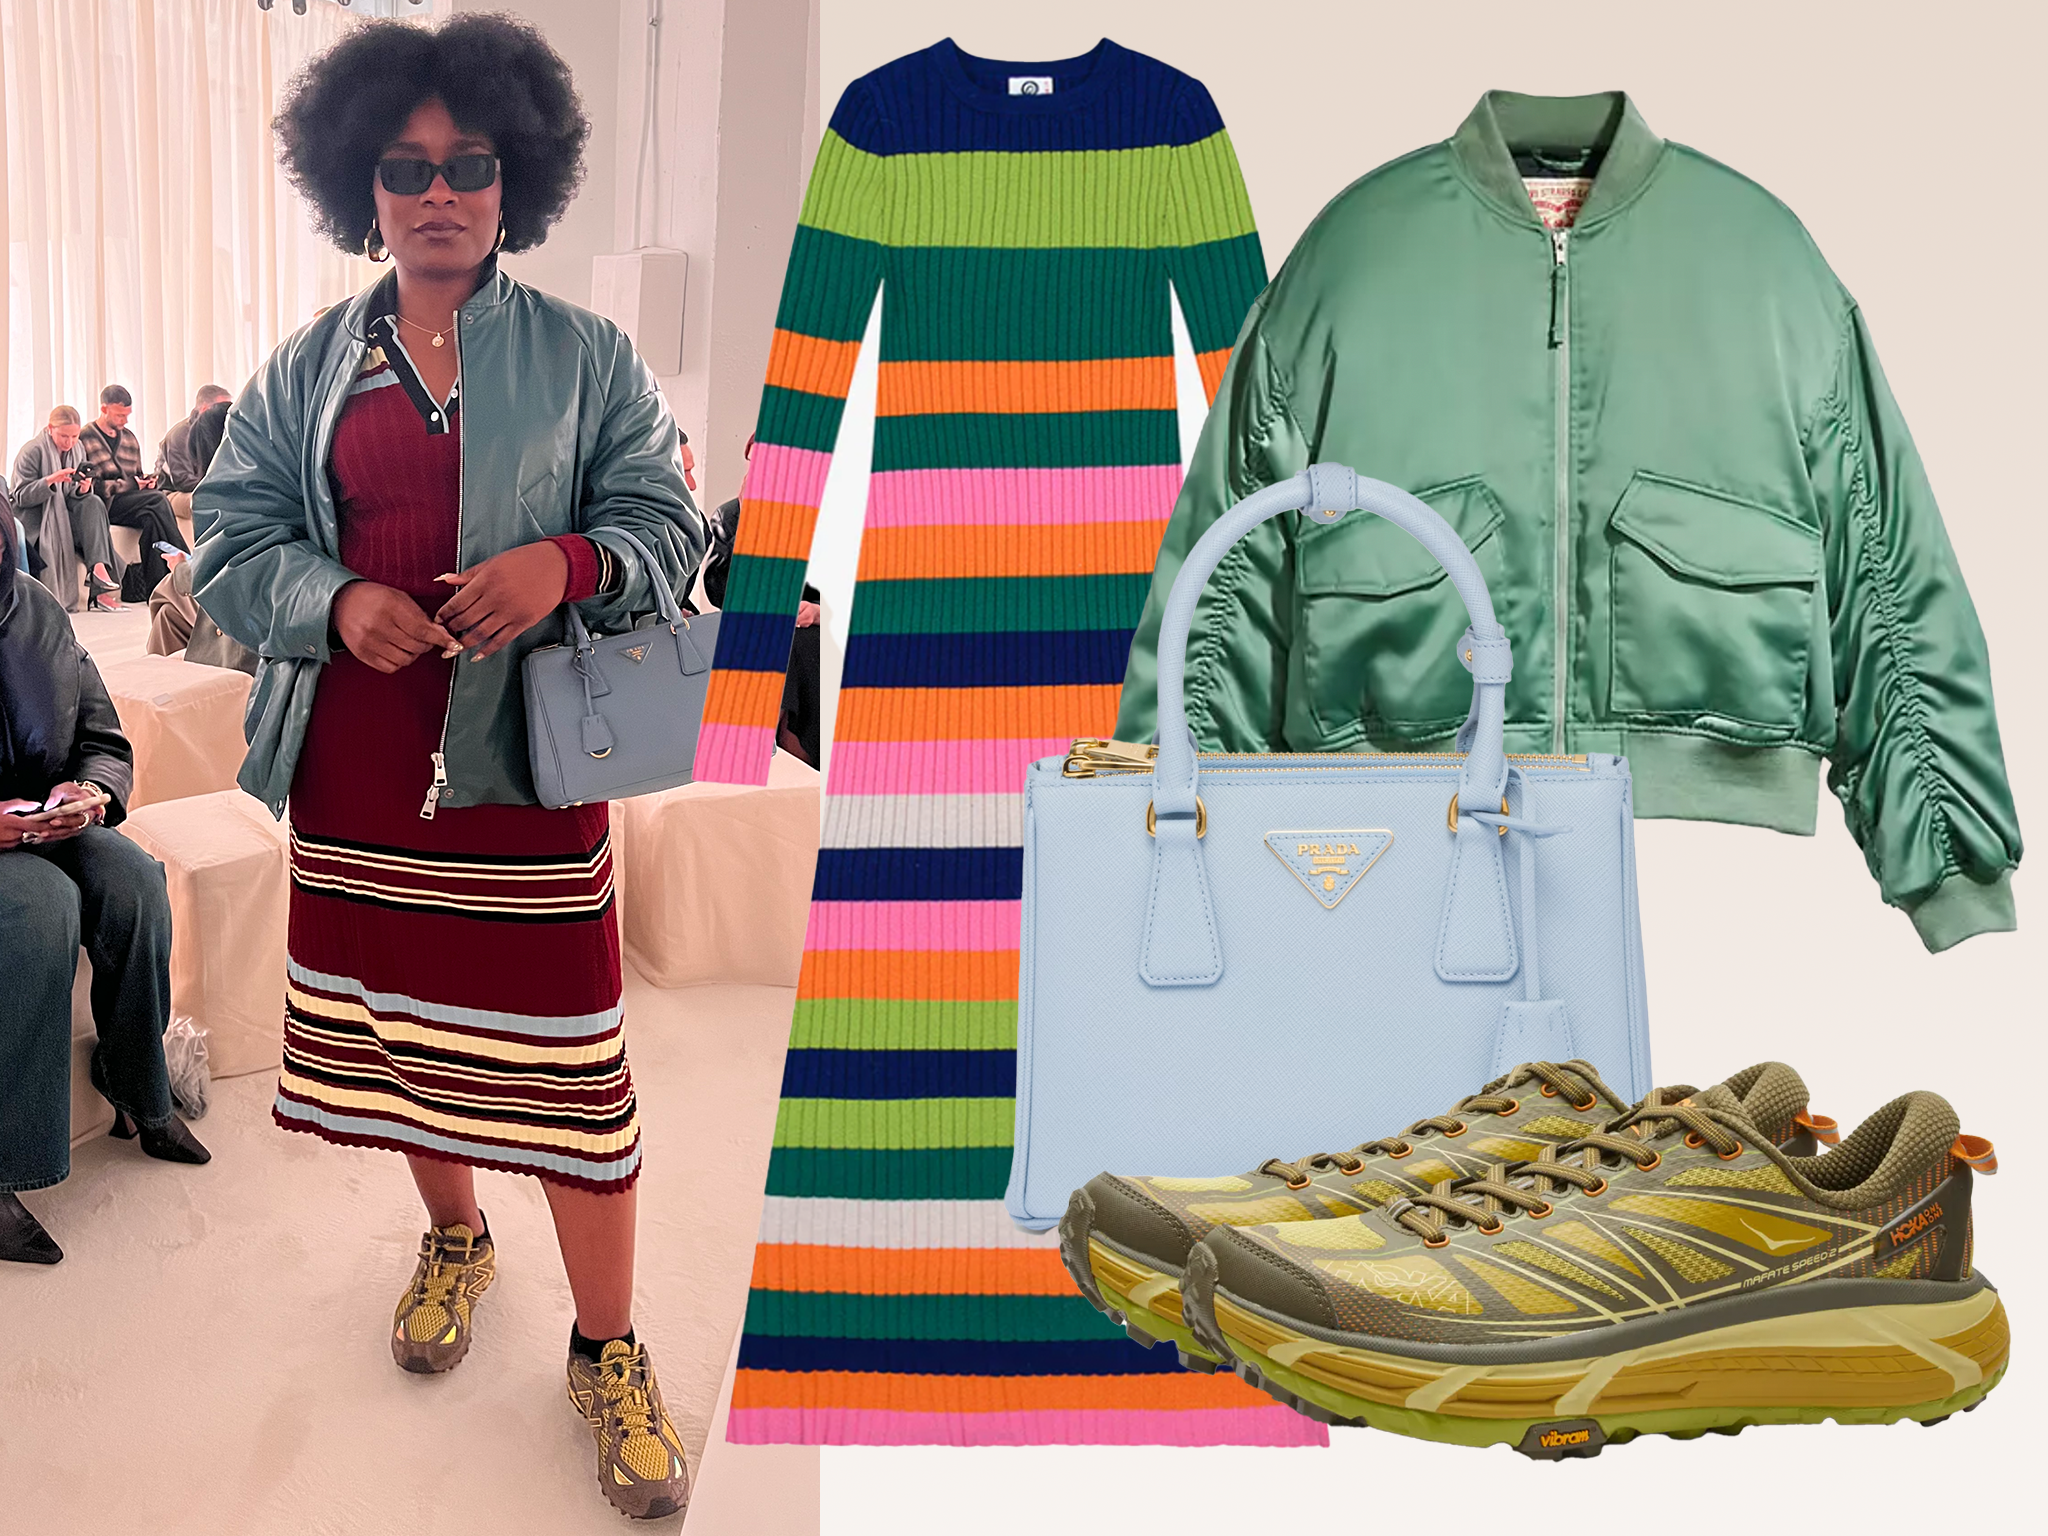 Toni Blaze contrasts colours for a chic-yet-comfy look